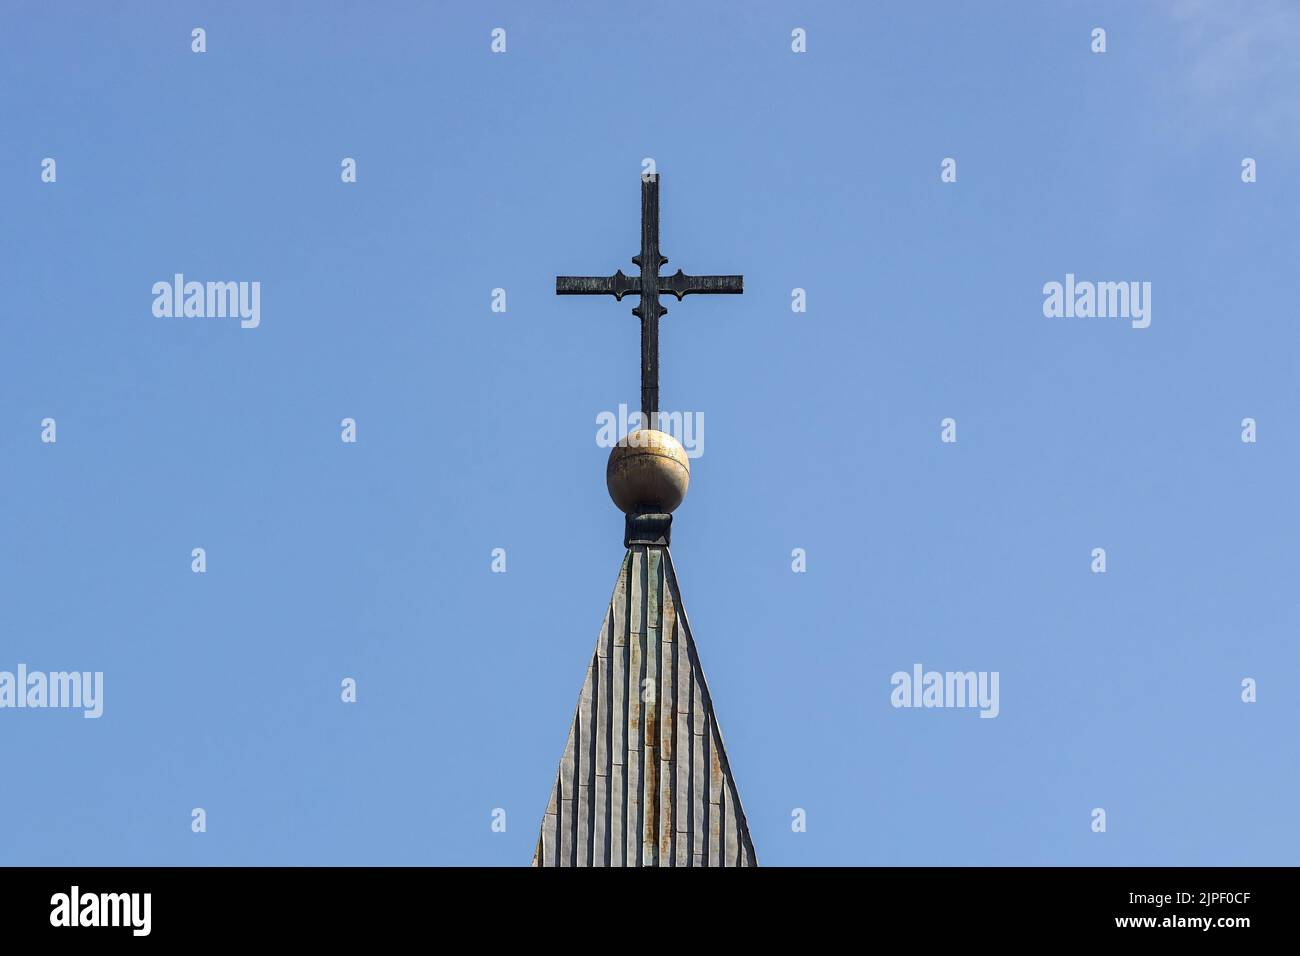 Bucharest, Romania - April 14, 2022: The cross on the bell tower of the Roman Catholic church 'Baratia', in downtown Bucharest. Stock Photo